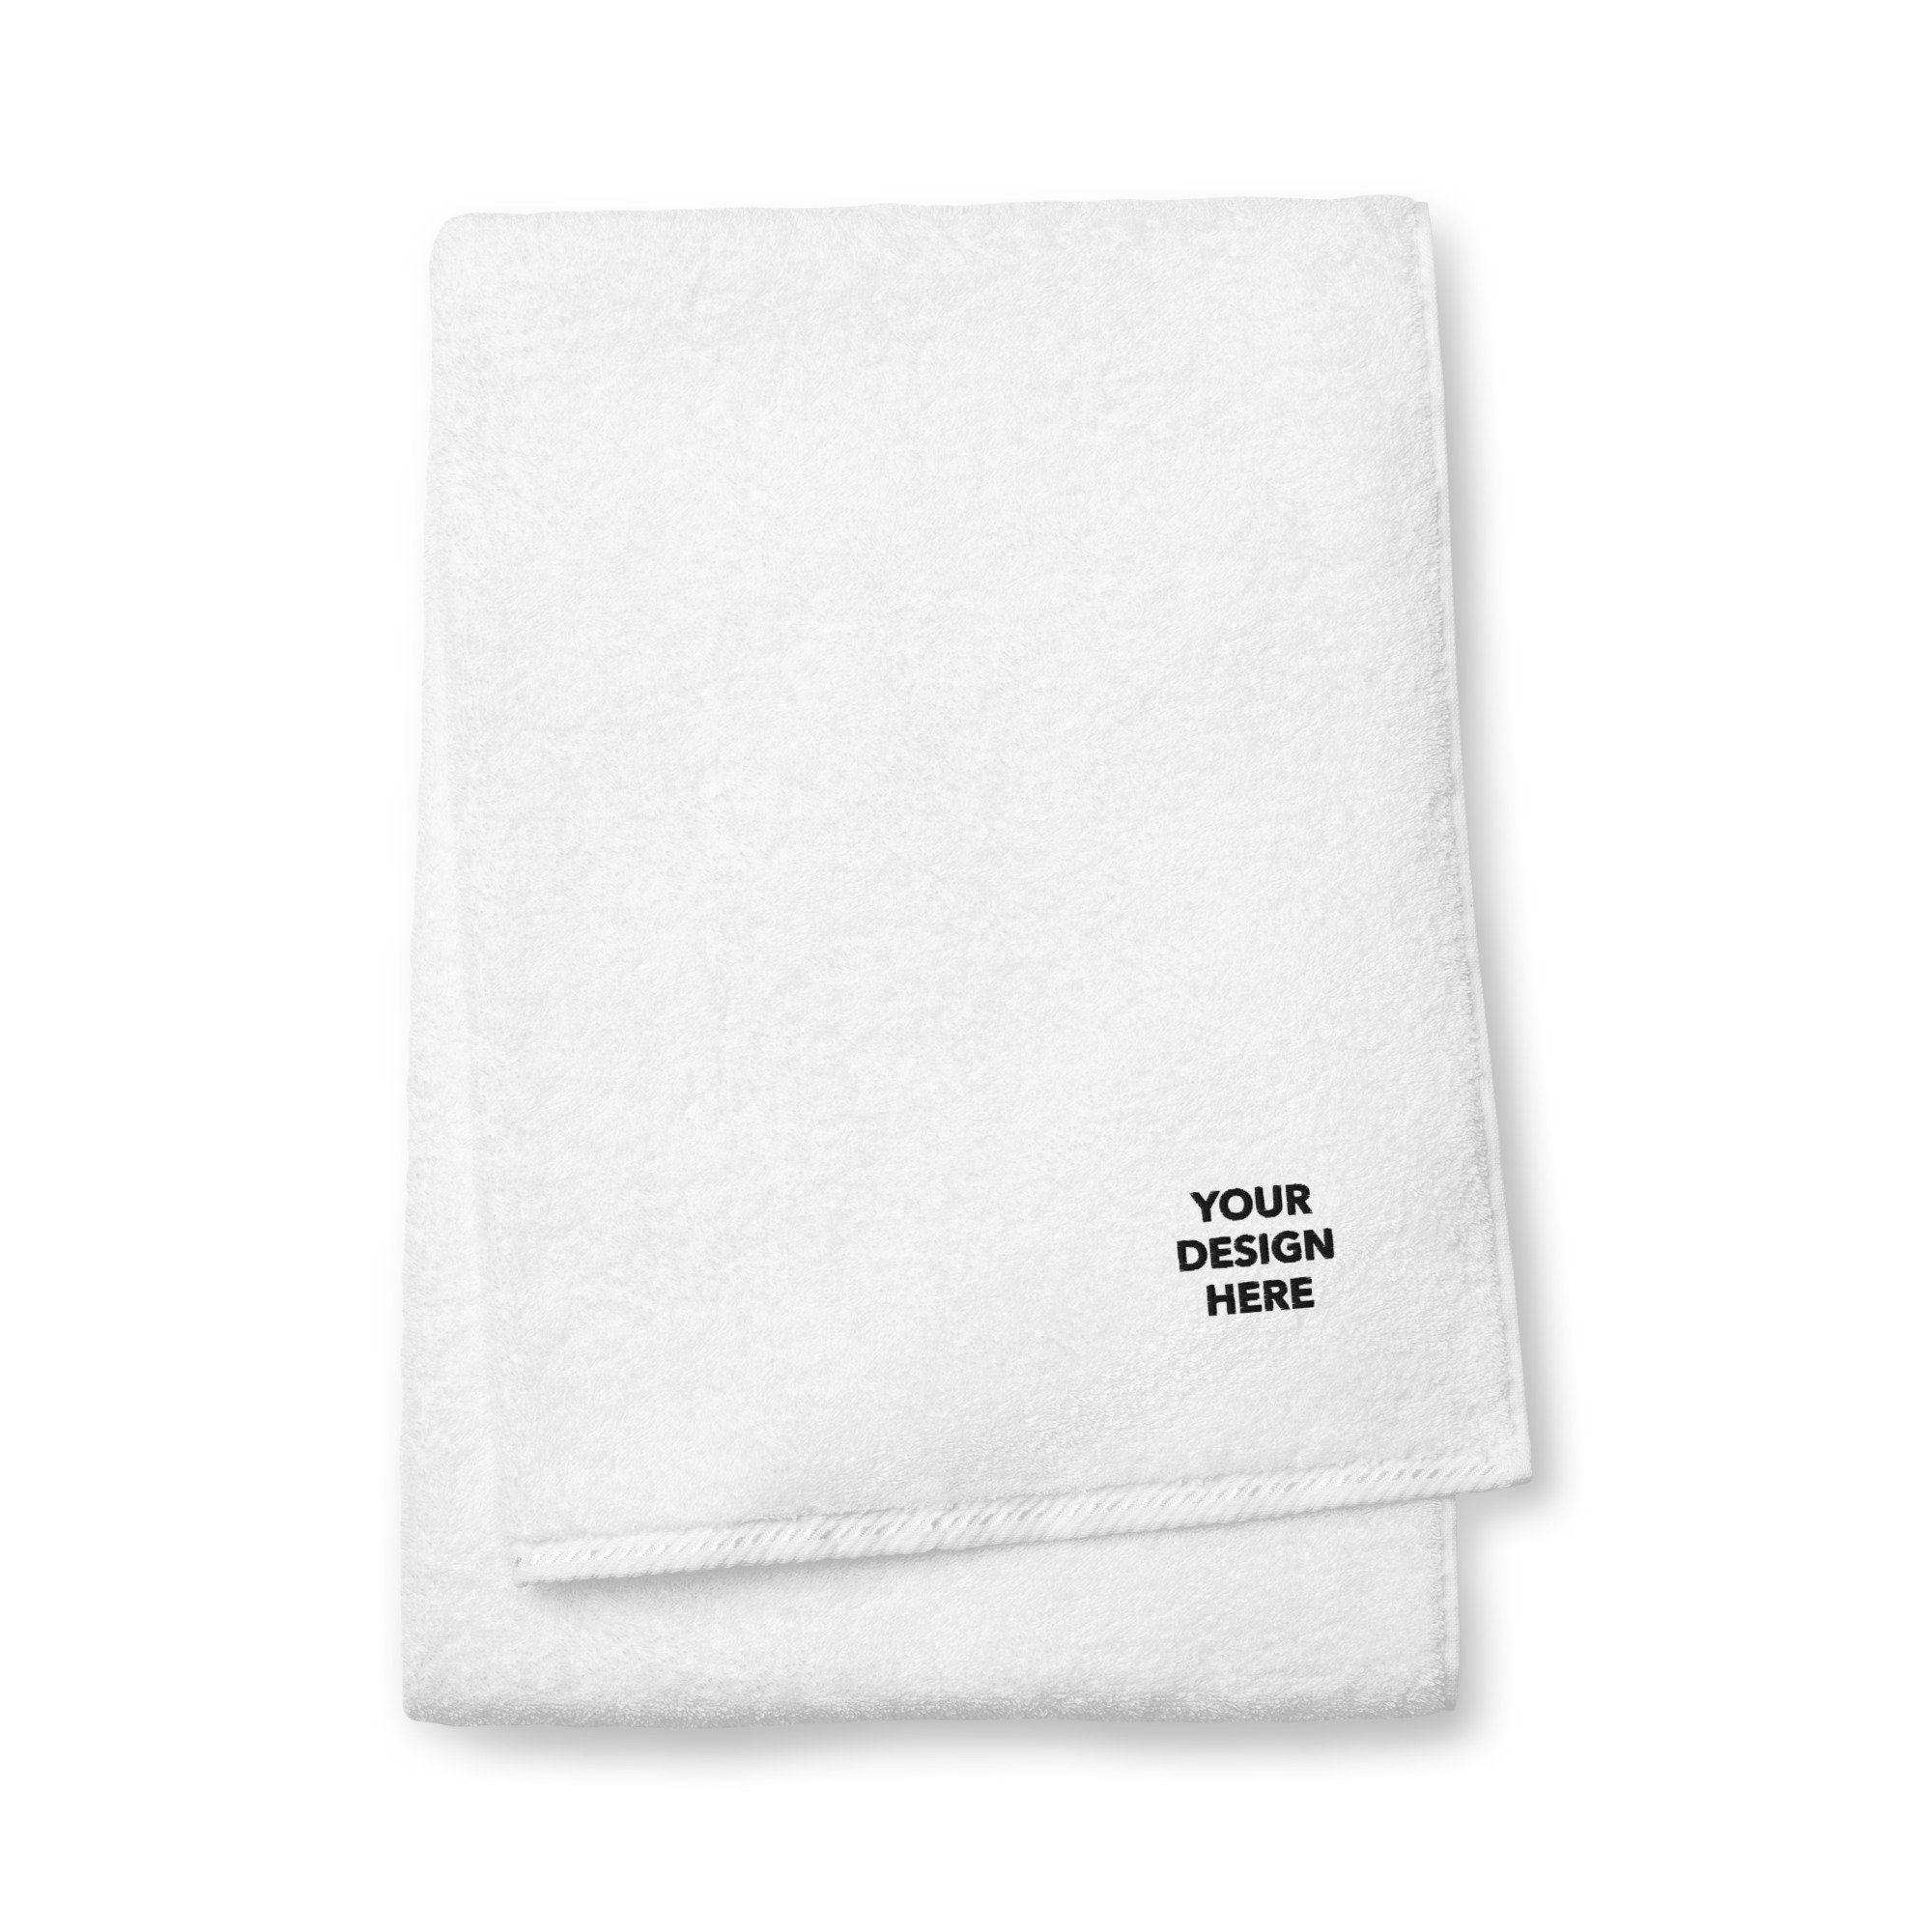 Personalized Embroidered Turkish Cotton Towel, Customized Logo Towel, Embroidery With Your Own Text or Design, Handmade Stitched Towel